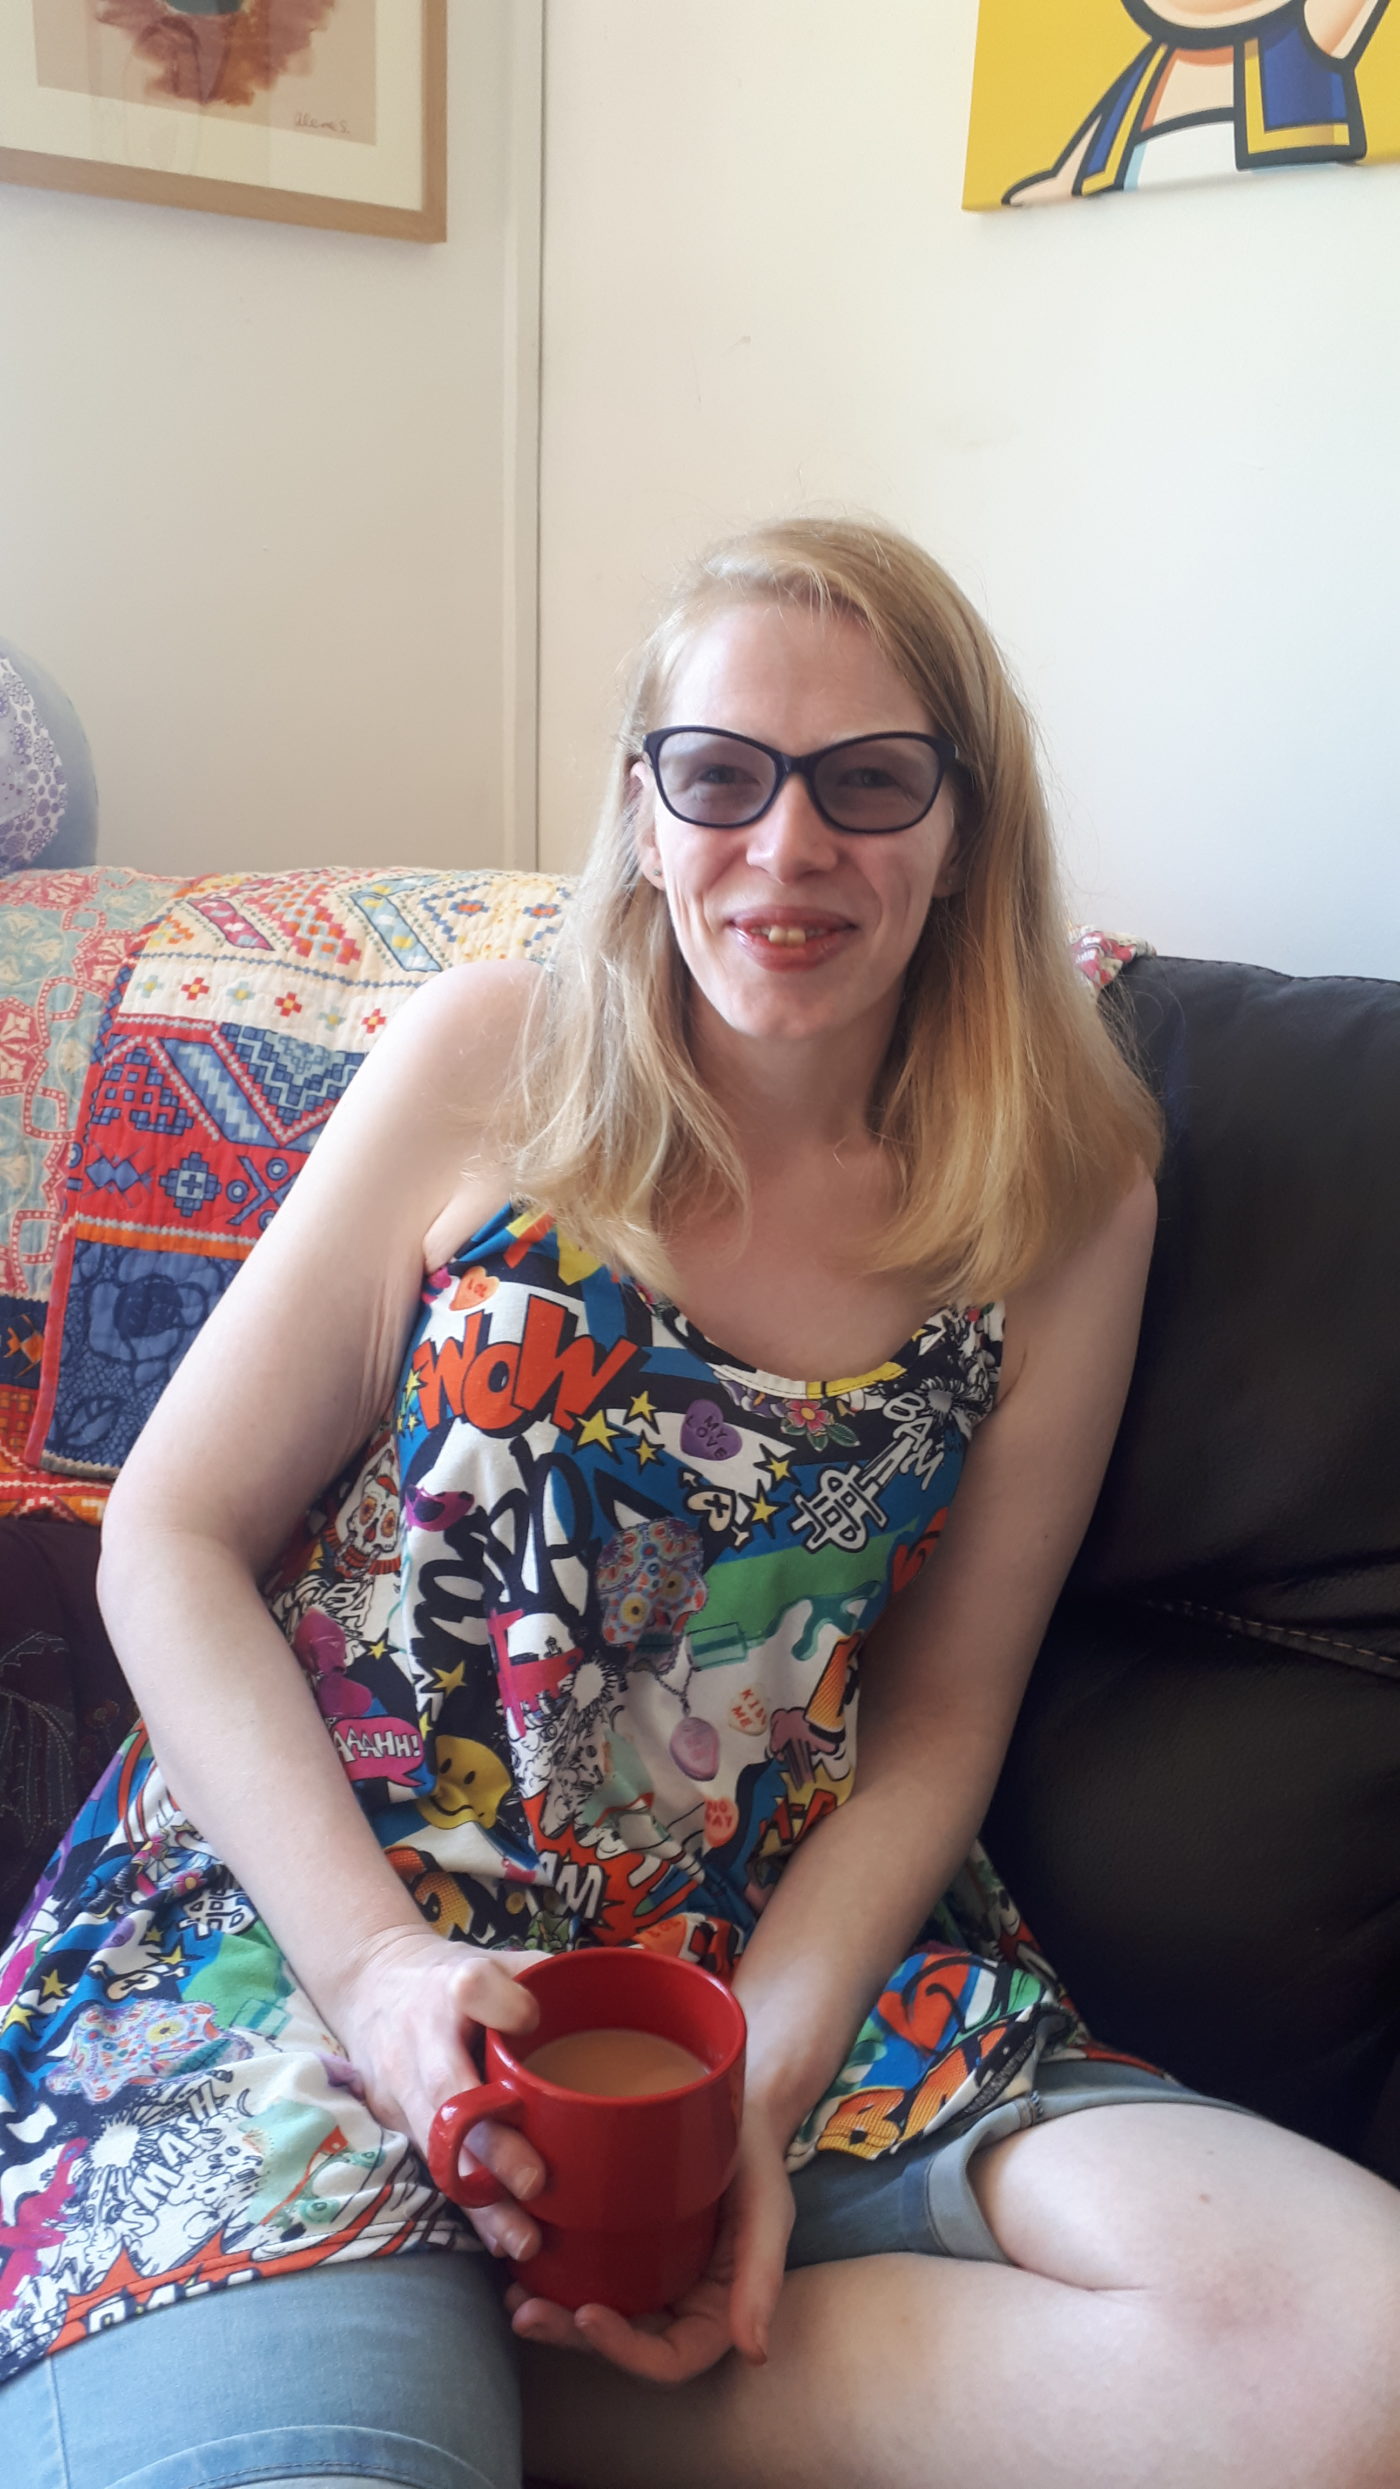 An image of Vicky. She is sat down wearing glasses and holding a cup of tea. She has long blonde hair and a floral vest top on.